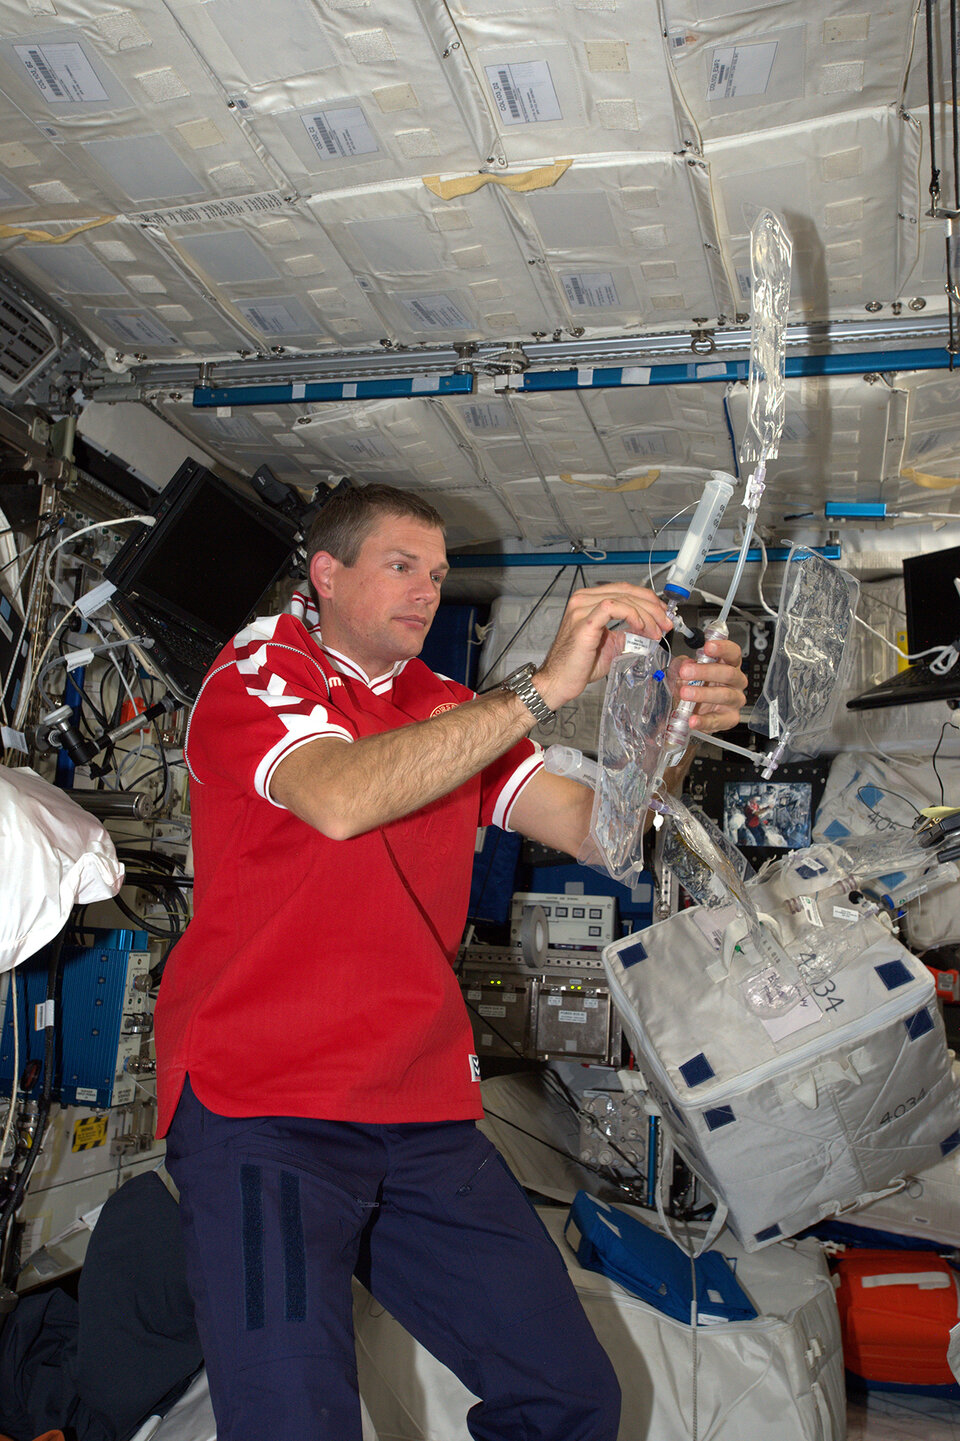 ESA astronaut Andreas Mogensen during his 10-day iriss mission on the Space Station